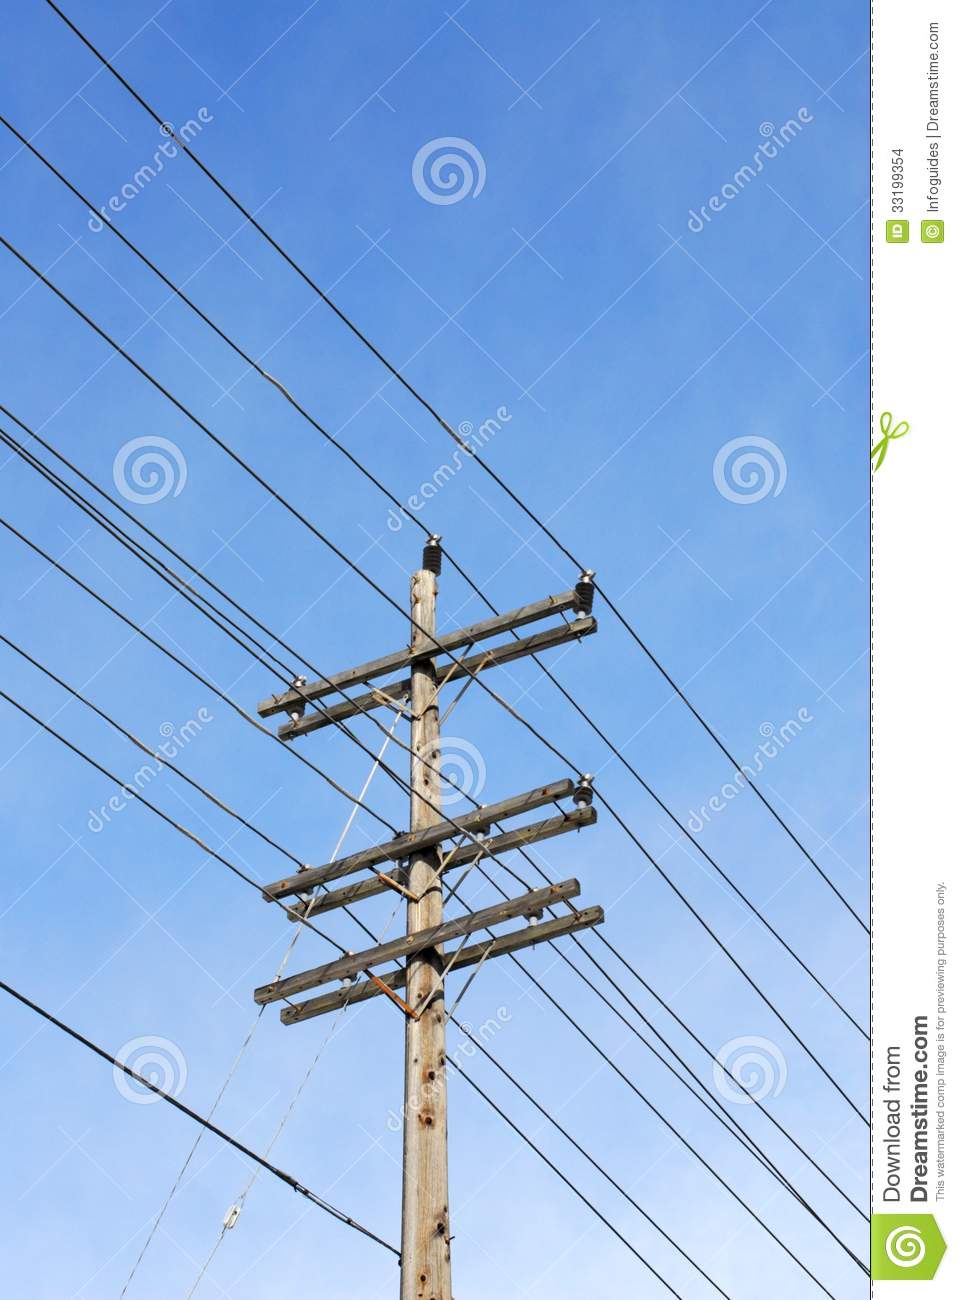 Wooden Electrical Transmission Pole And Power Lines Against Sky